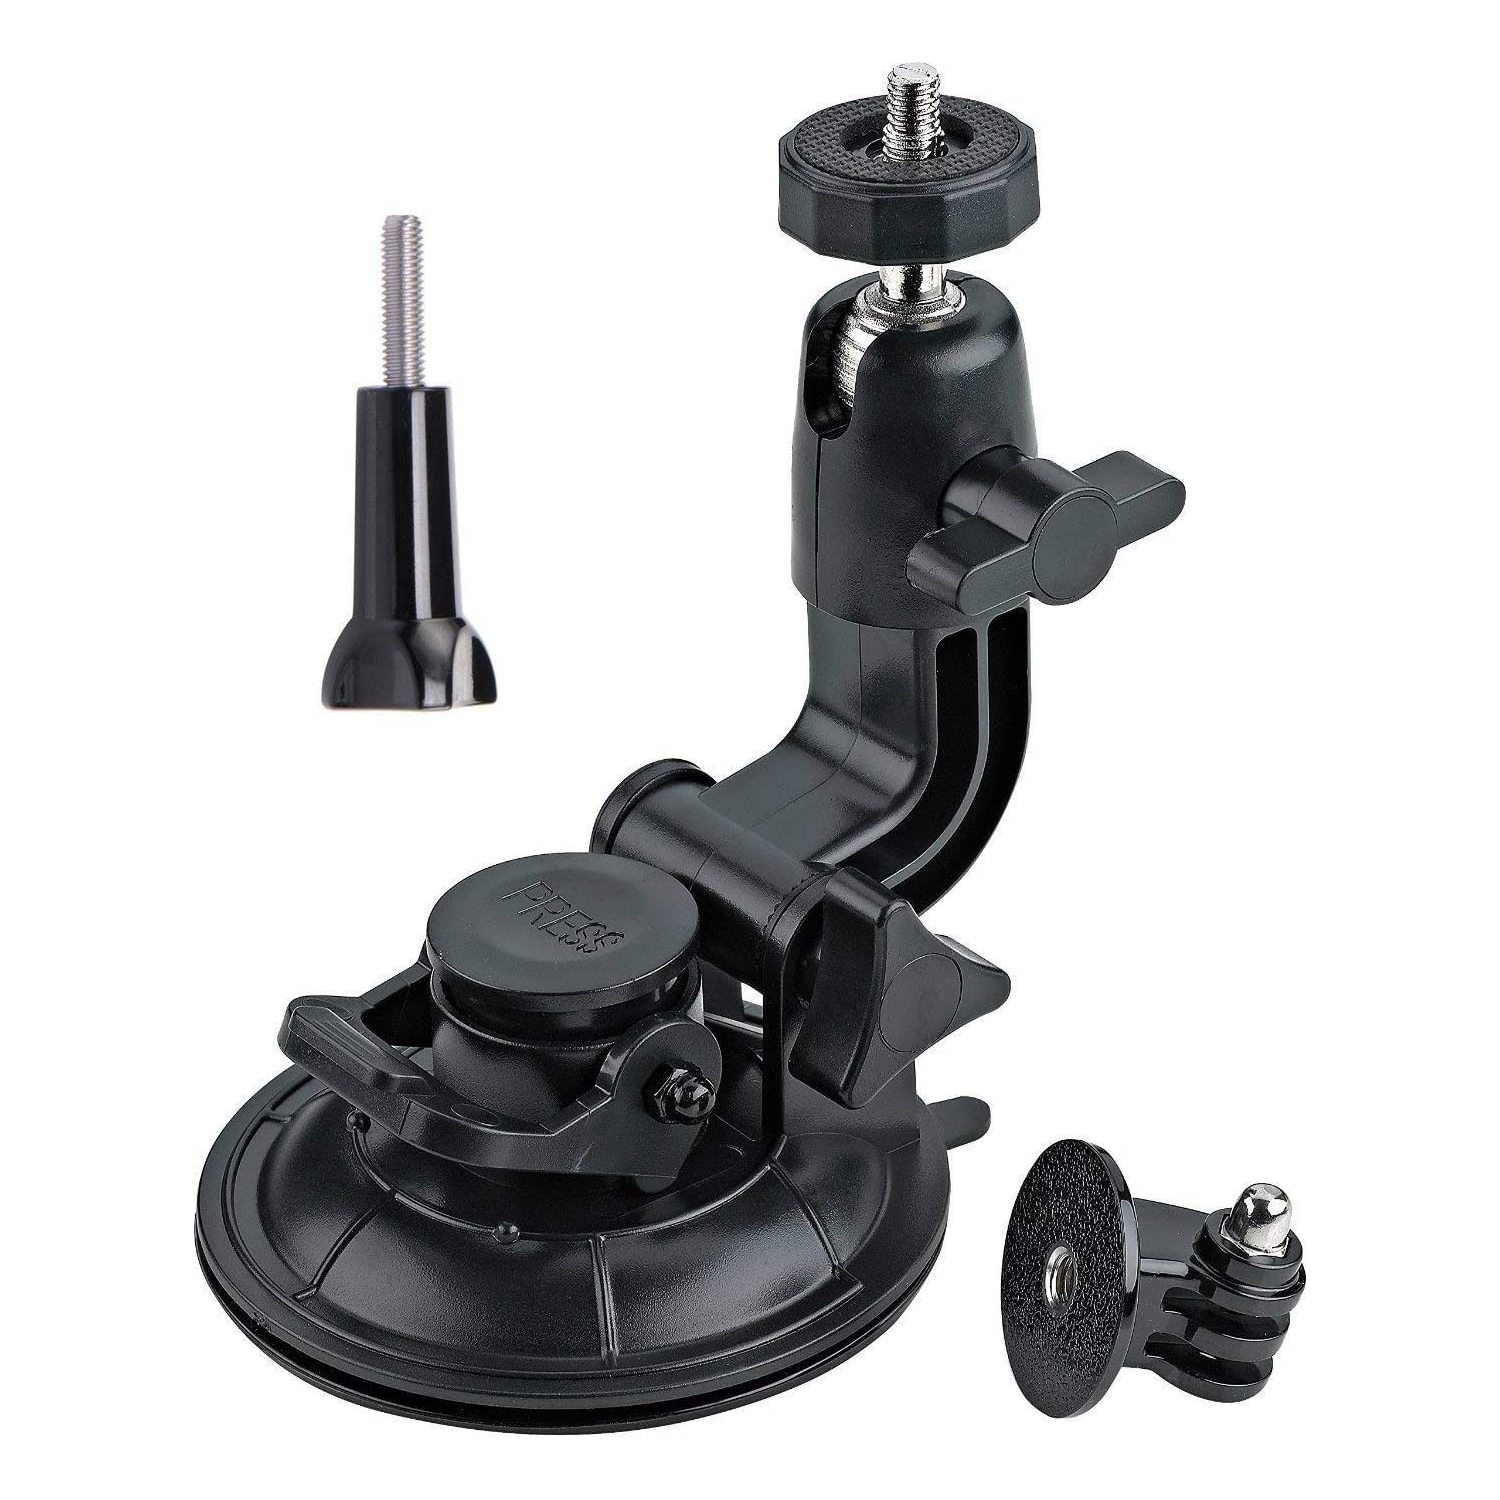 360 Degrees Rotation Suction Cup Mount+Tripod Adapter+Long Mounting Screw For Gopro Windshield Mount Hero7/6/5 Black Hero 4 Silver Xiaomi YI 4k Gitup Git2 Sony ODRVM 12MP 10